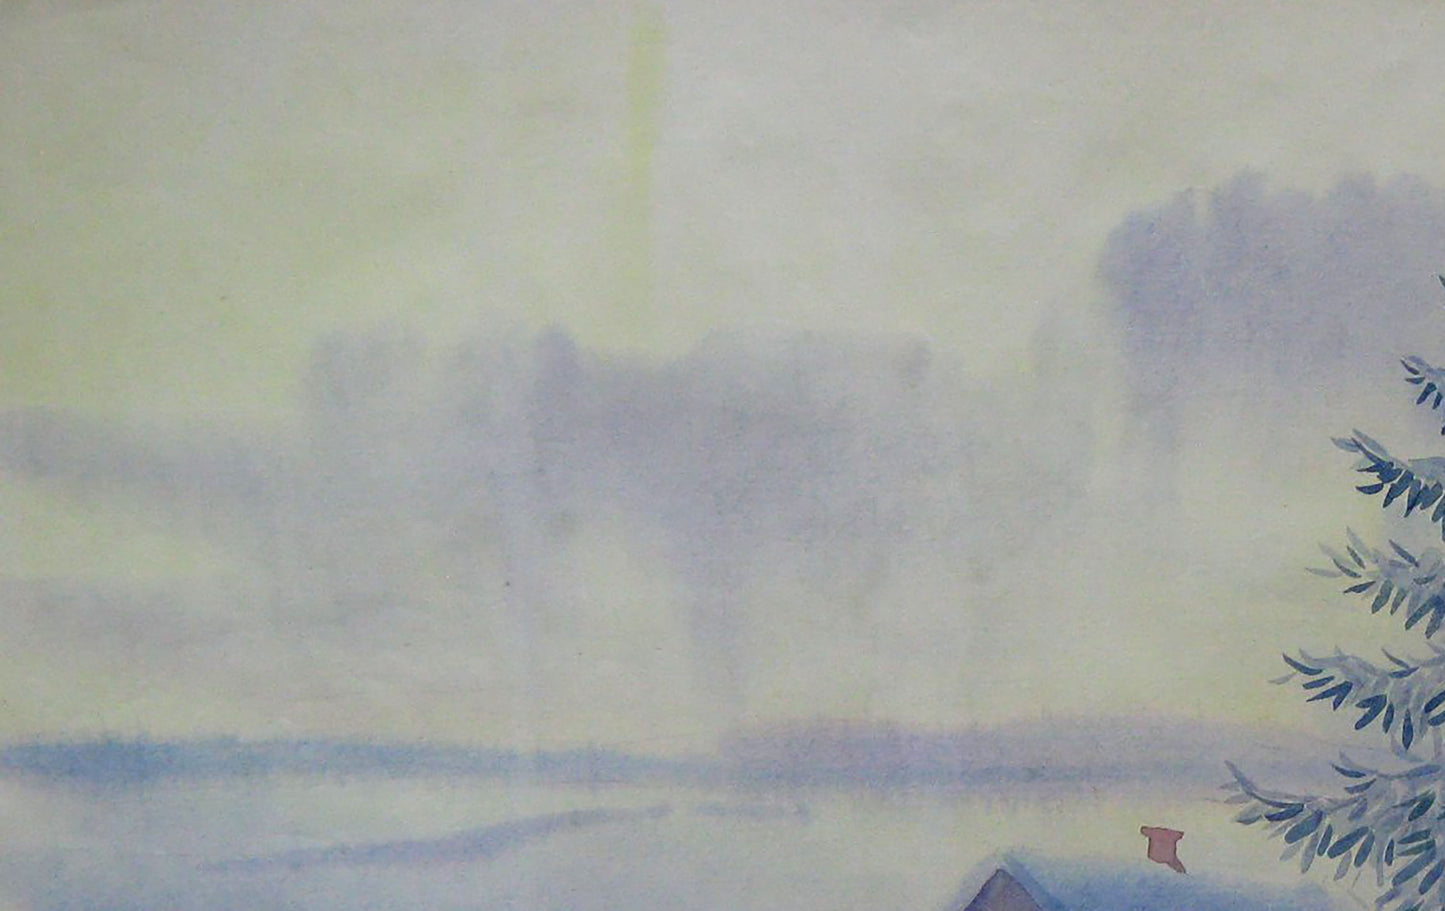 January Morning: a watercolor painting by Valery Savenets